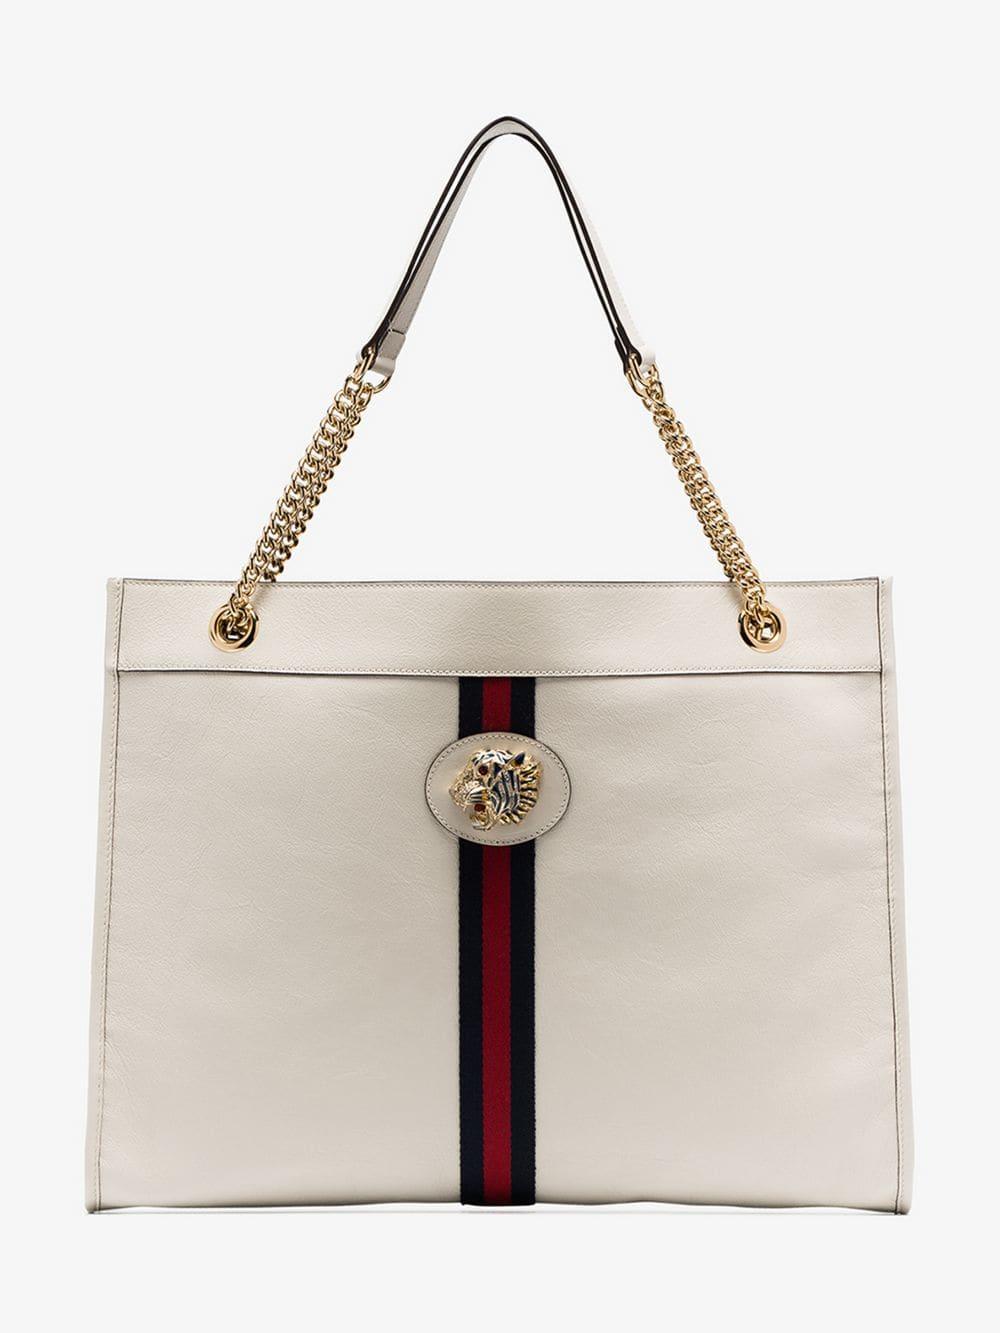 Gucci White Rajah Tiger-embellished Leather Tote Bag in Natural - Lyst